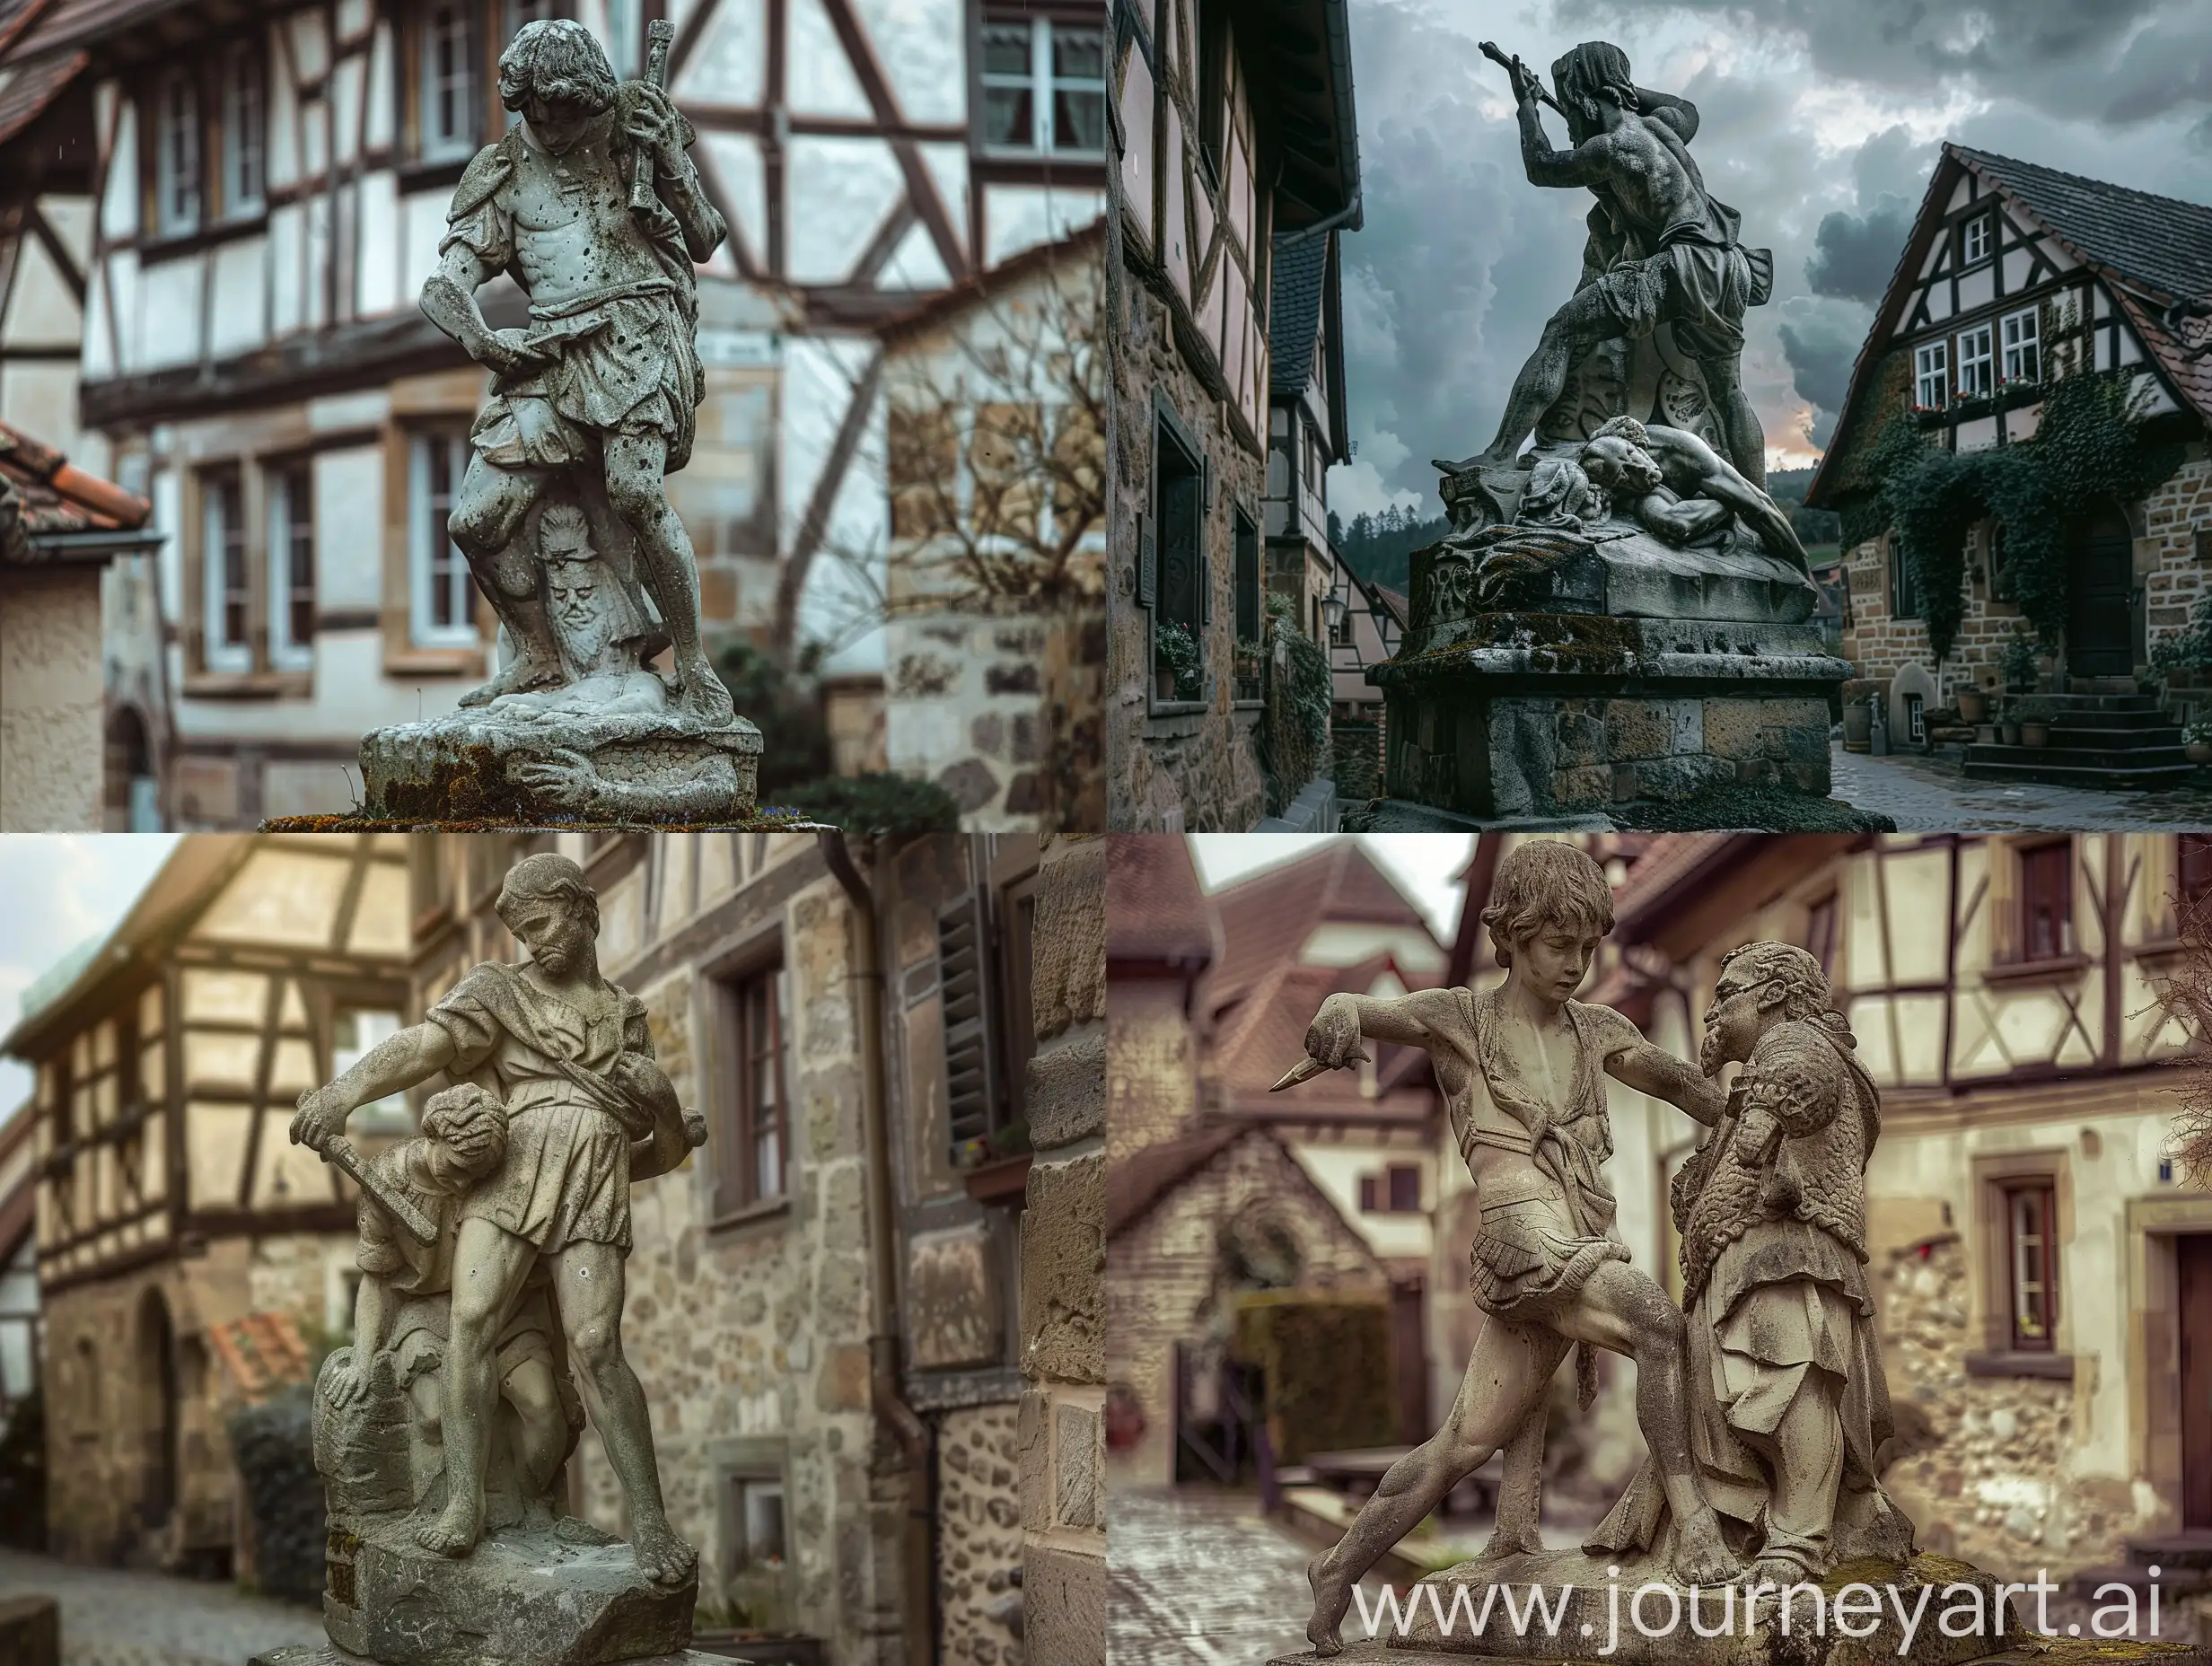  A stone statue depicting a young man murdering an old with,the stone ststue stands in the middle of an old village in an old, German village ,classical lighting,q2